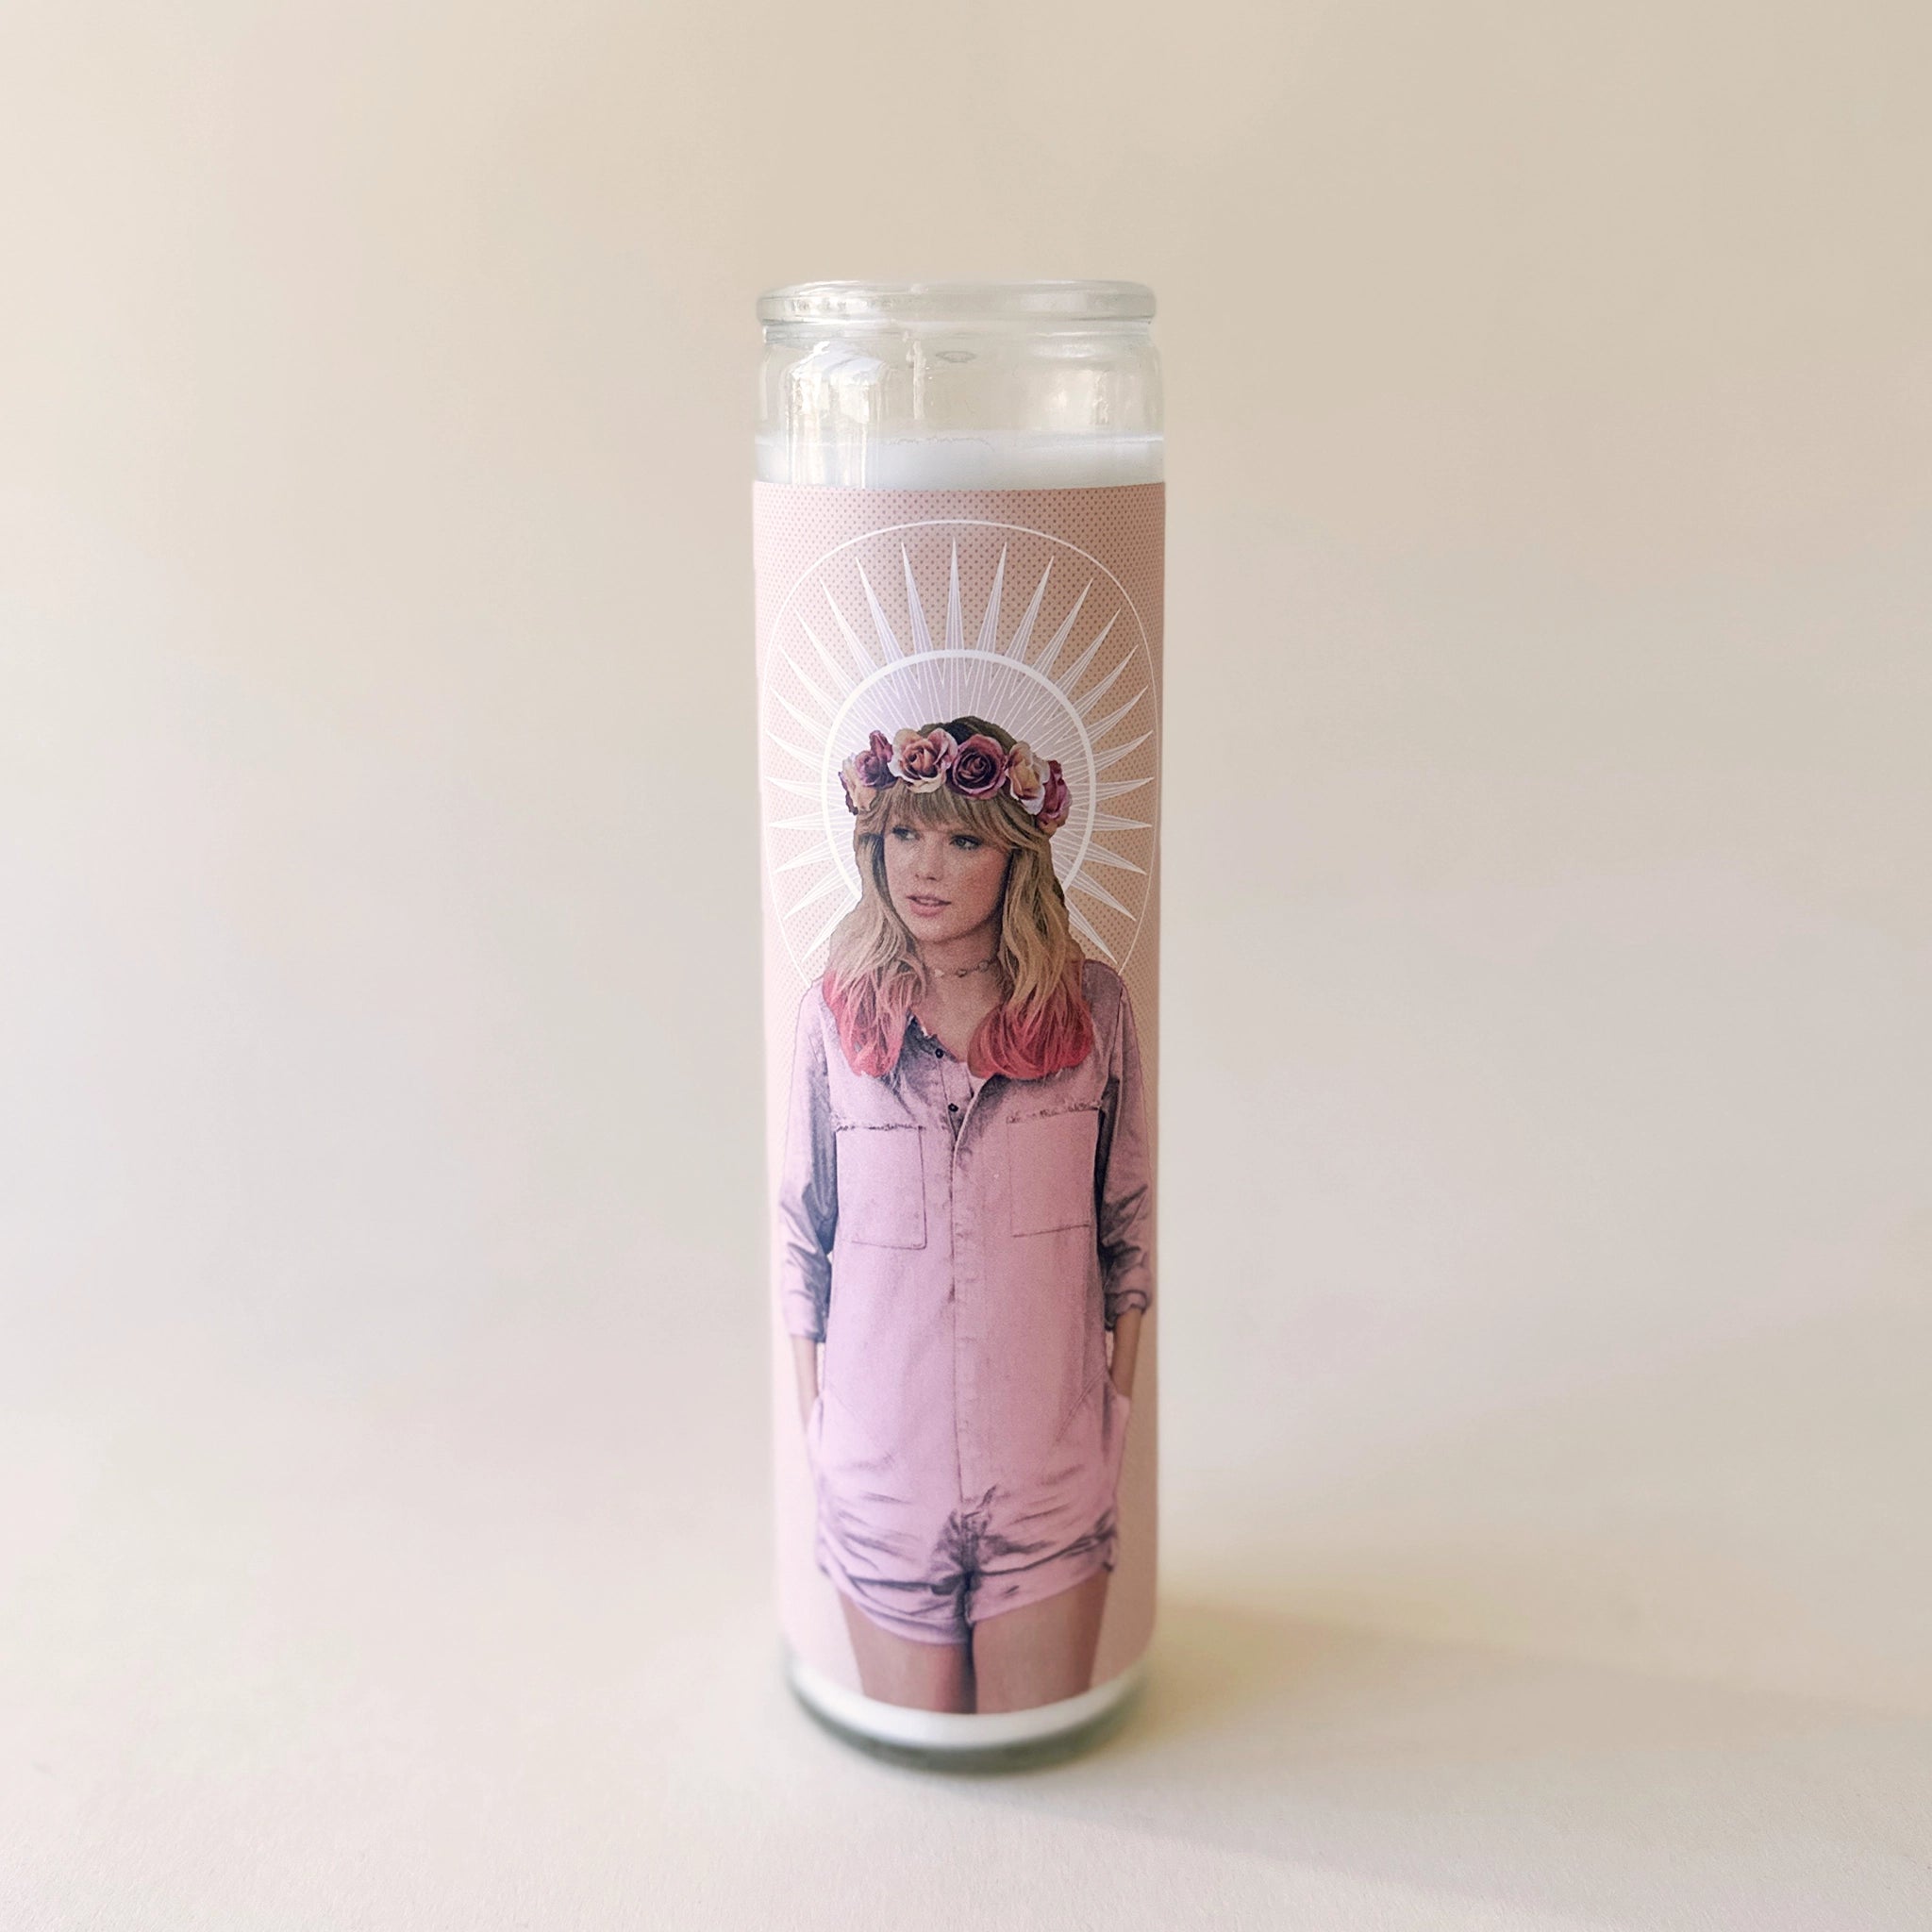 A thin prayer candle in a glass jar with a pink image of Taylor Swift in a pink jumpsuit with a rose flower crown on.